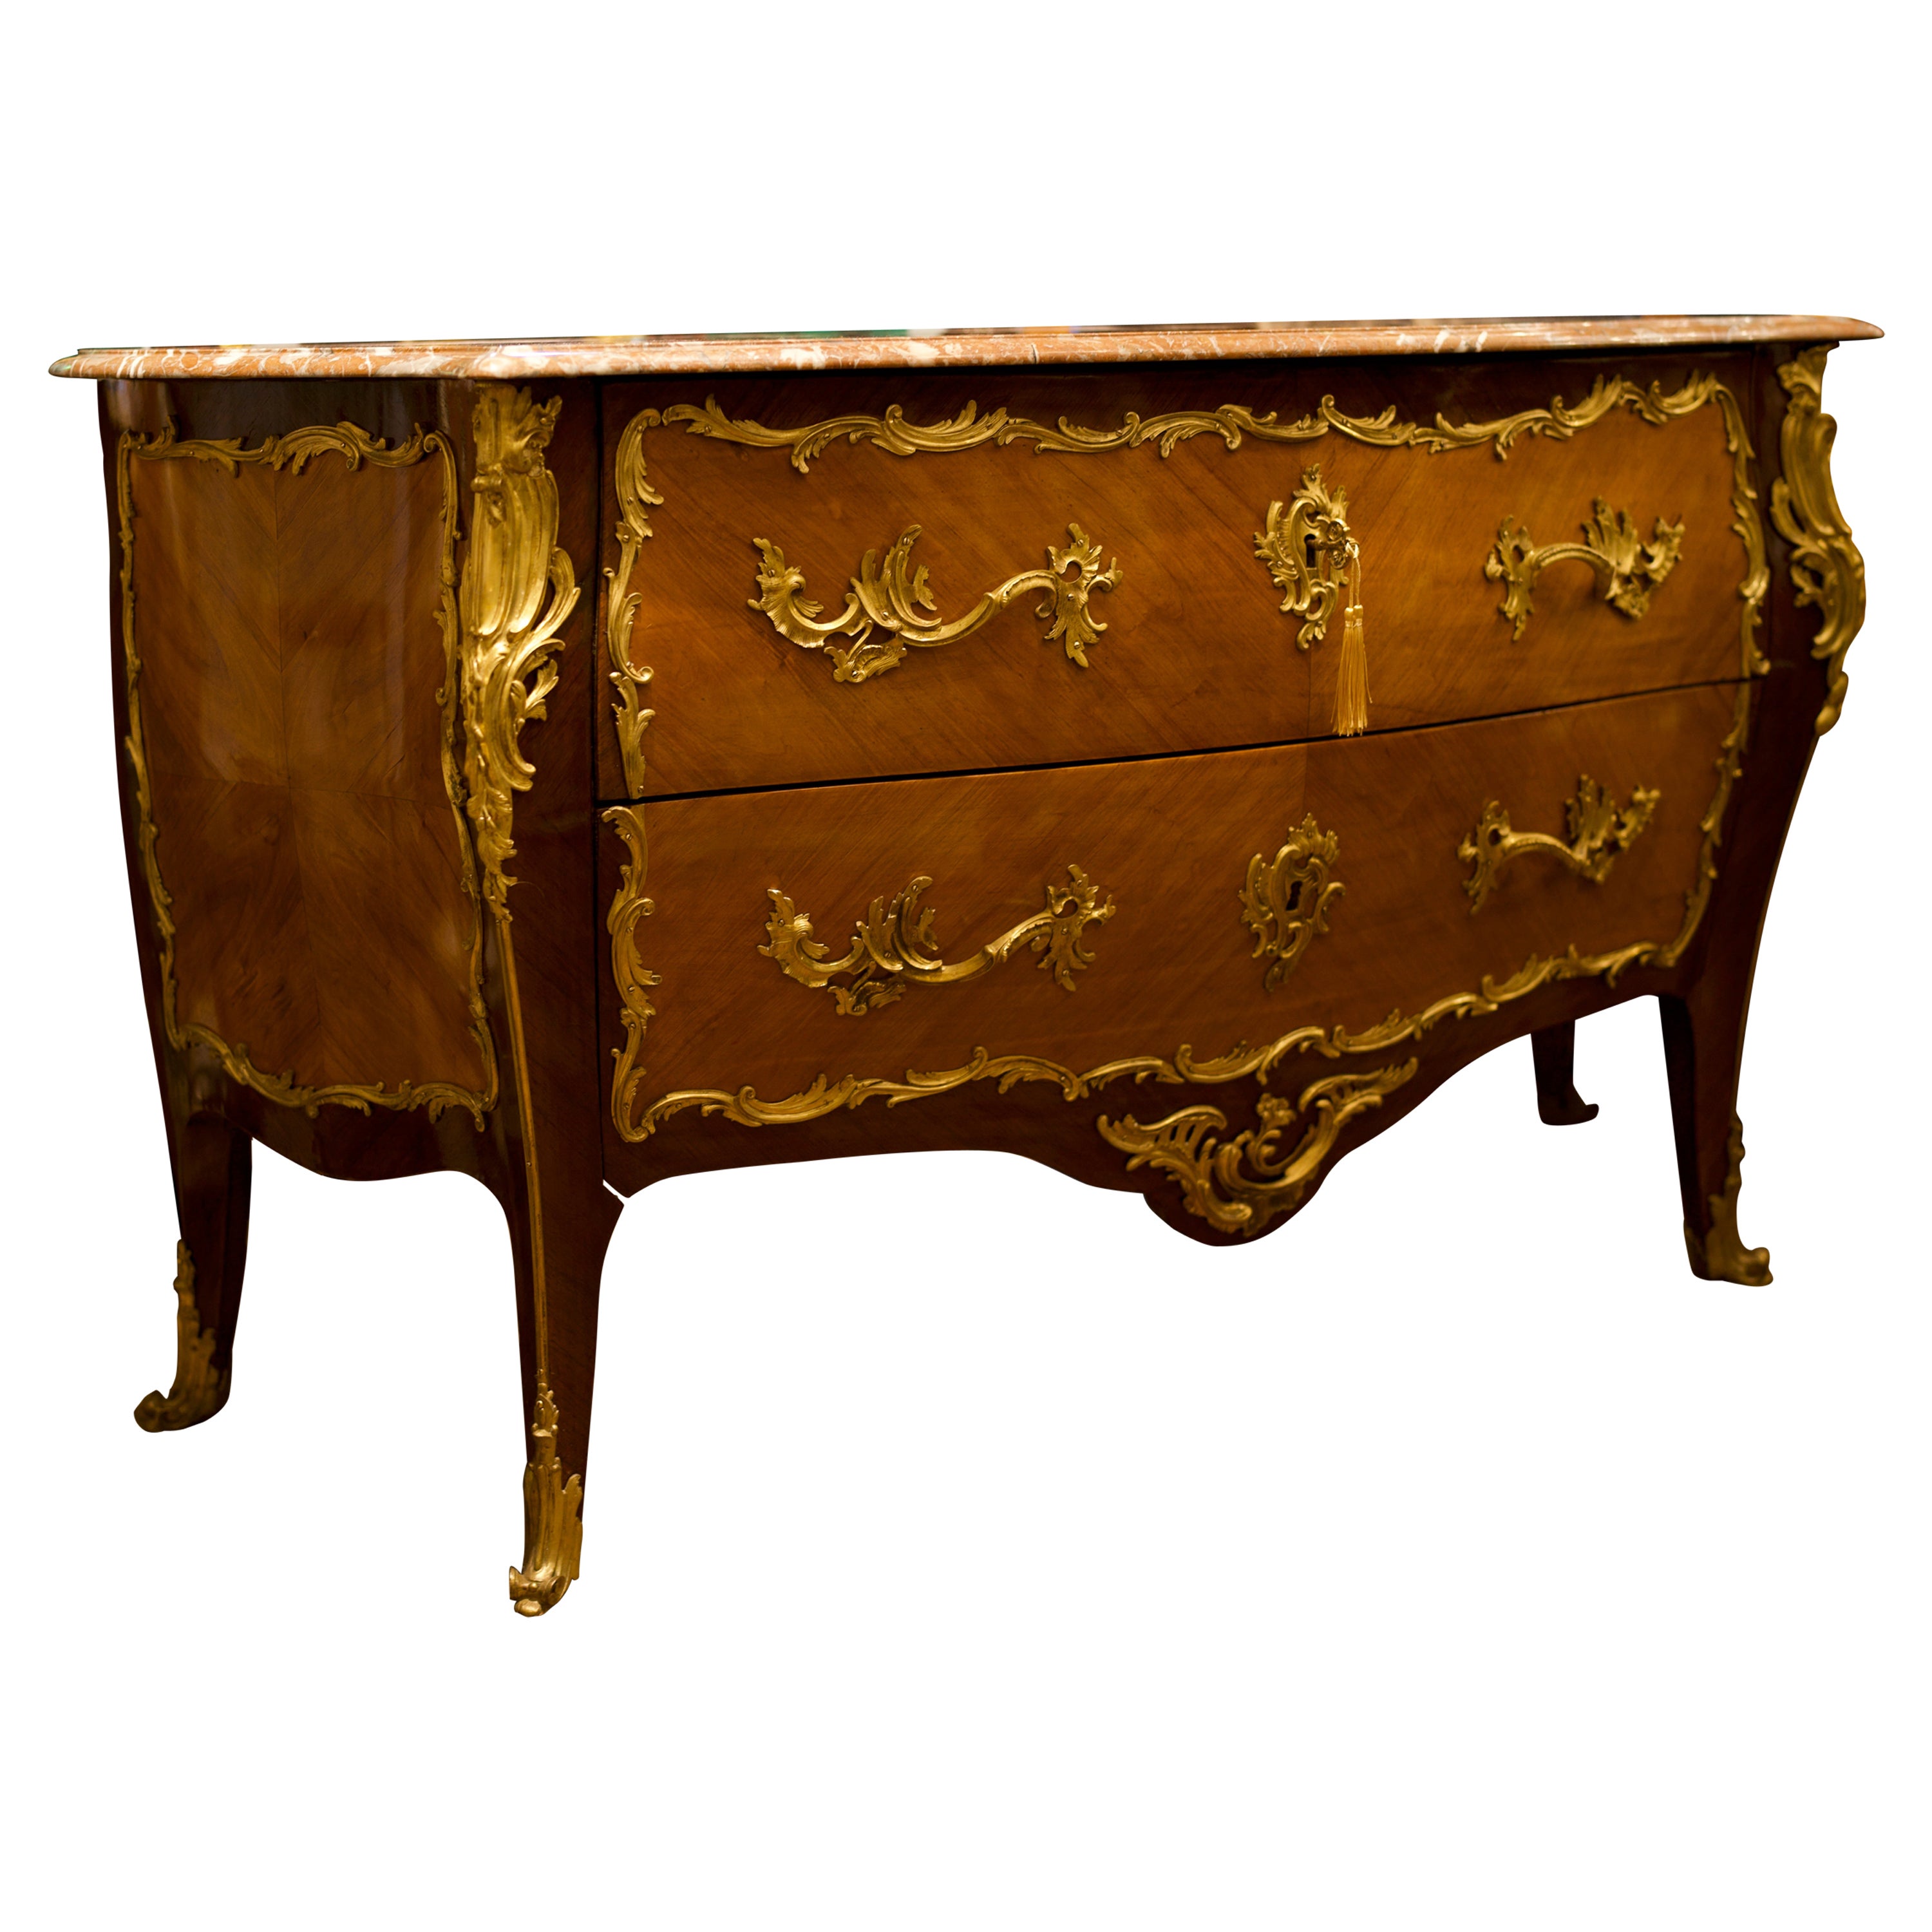 18th Century Marble-Top Bronze Mounted Kingwood Louis XV Commode